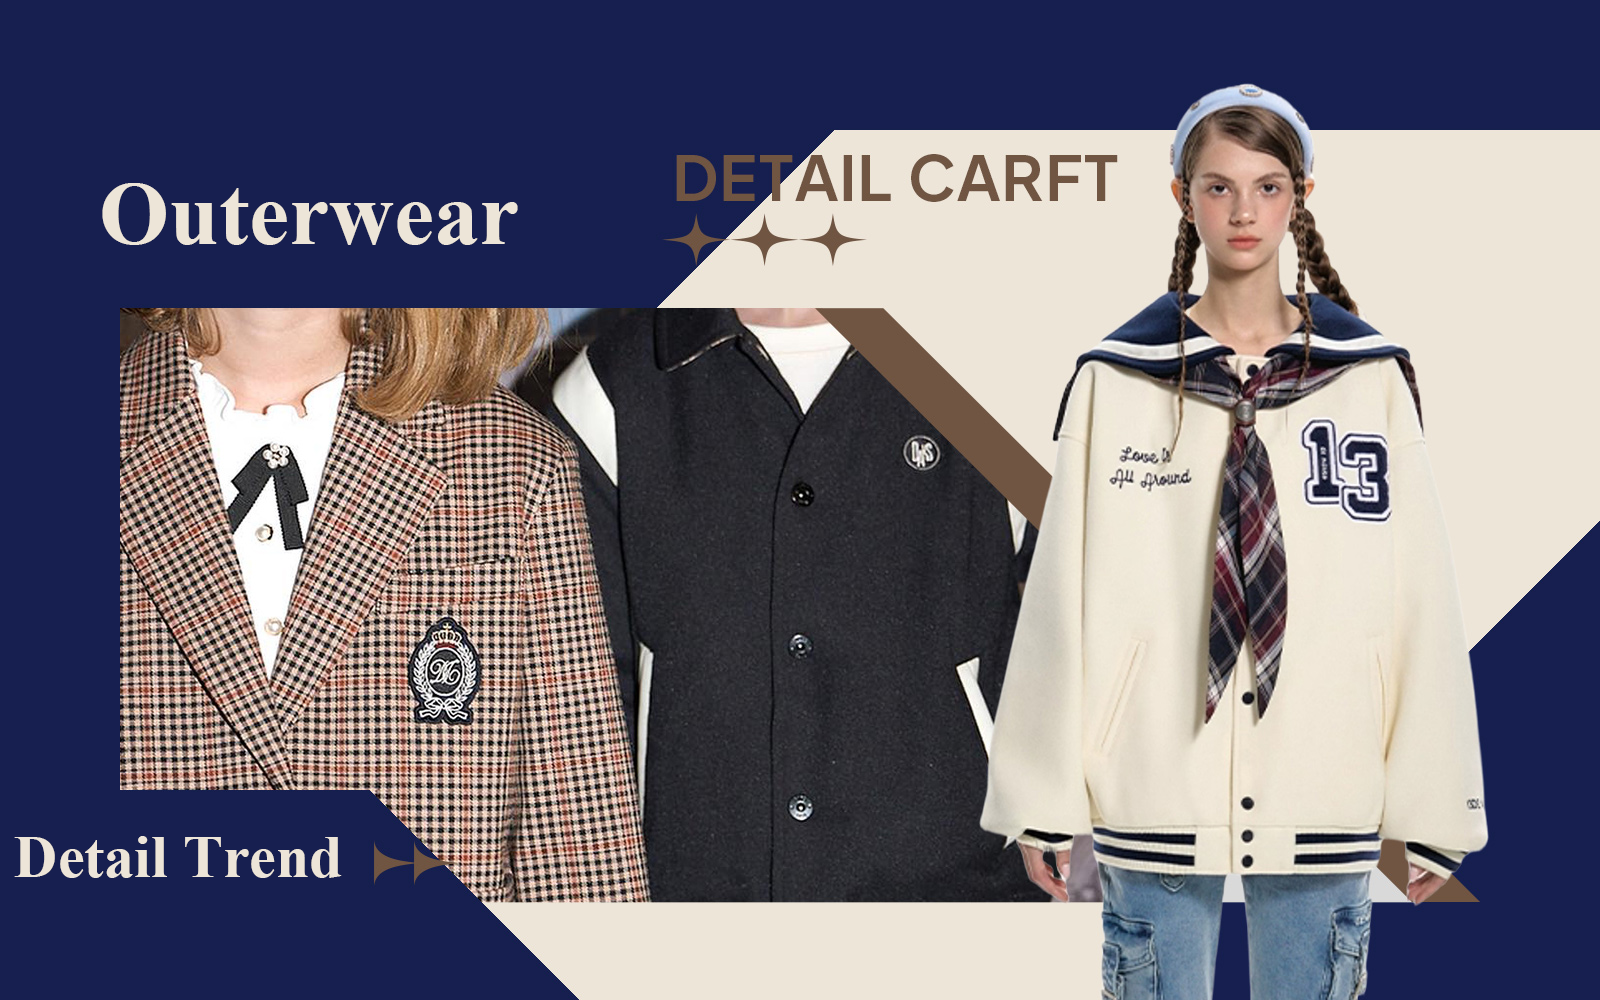 Academy Style -- The Detail & Craft Trend for Kids' Outerwear